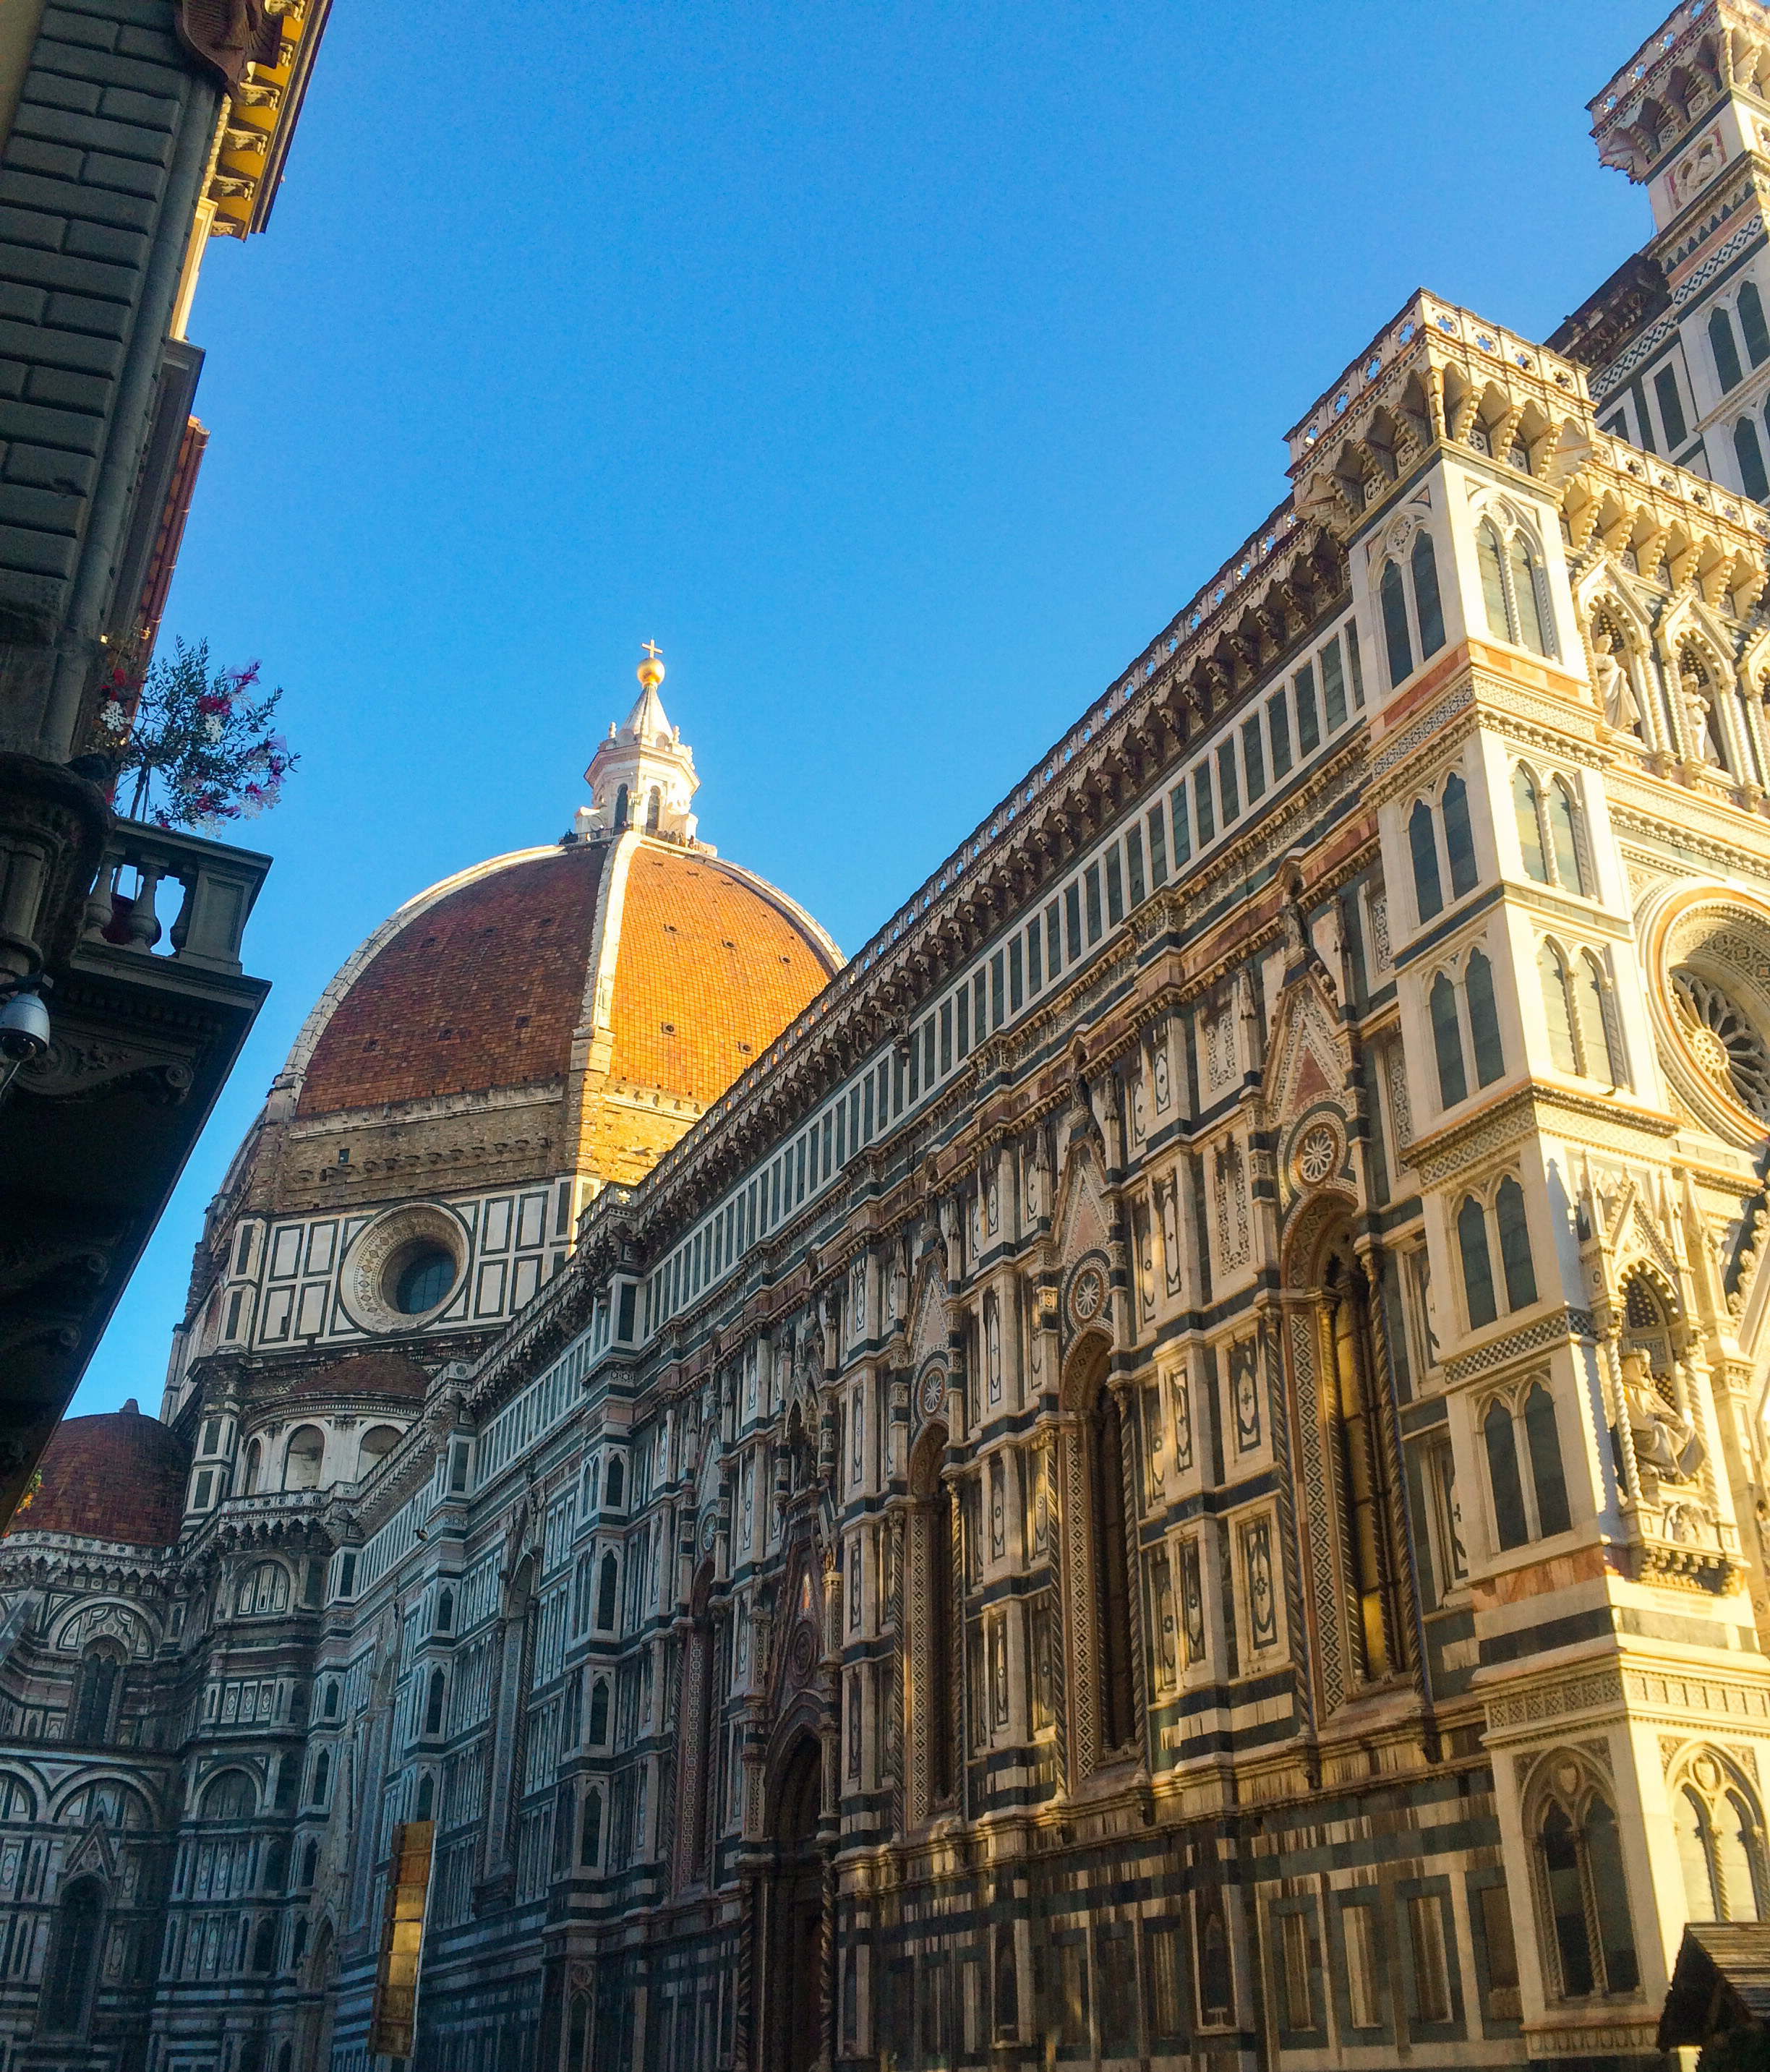 The intricate architecture of the Duomo in Florence